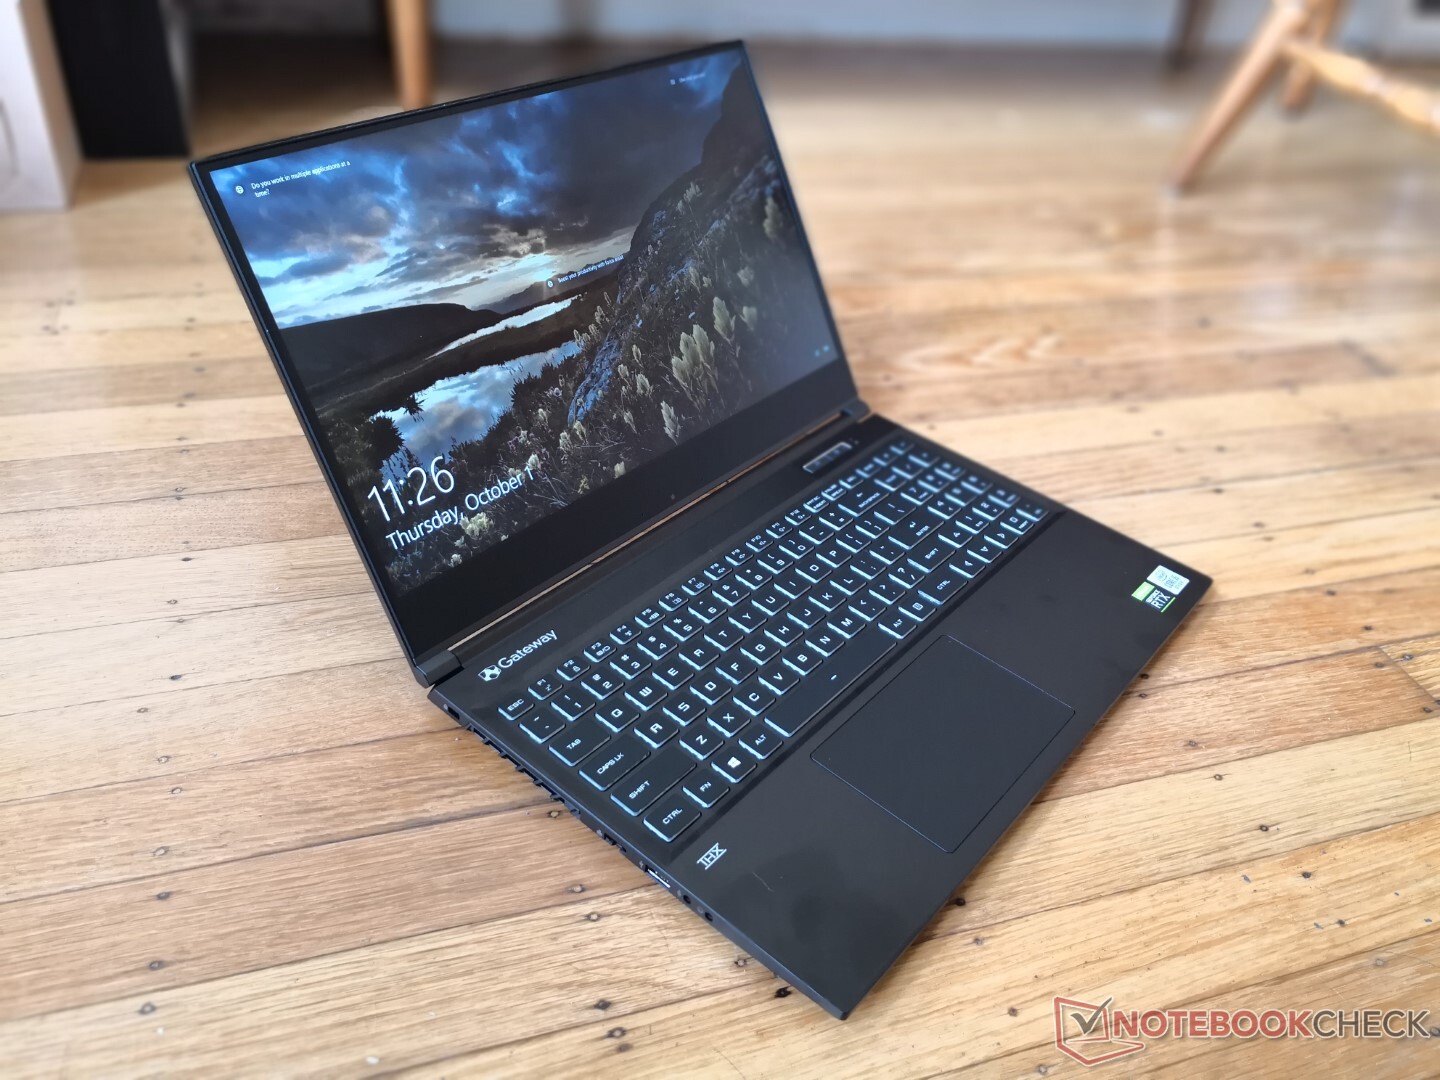 Are Gateway Laptops Good for Gaming?